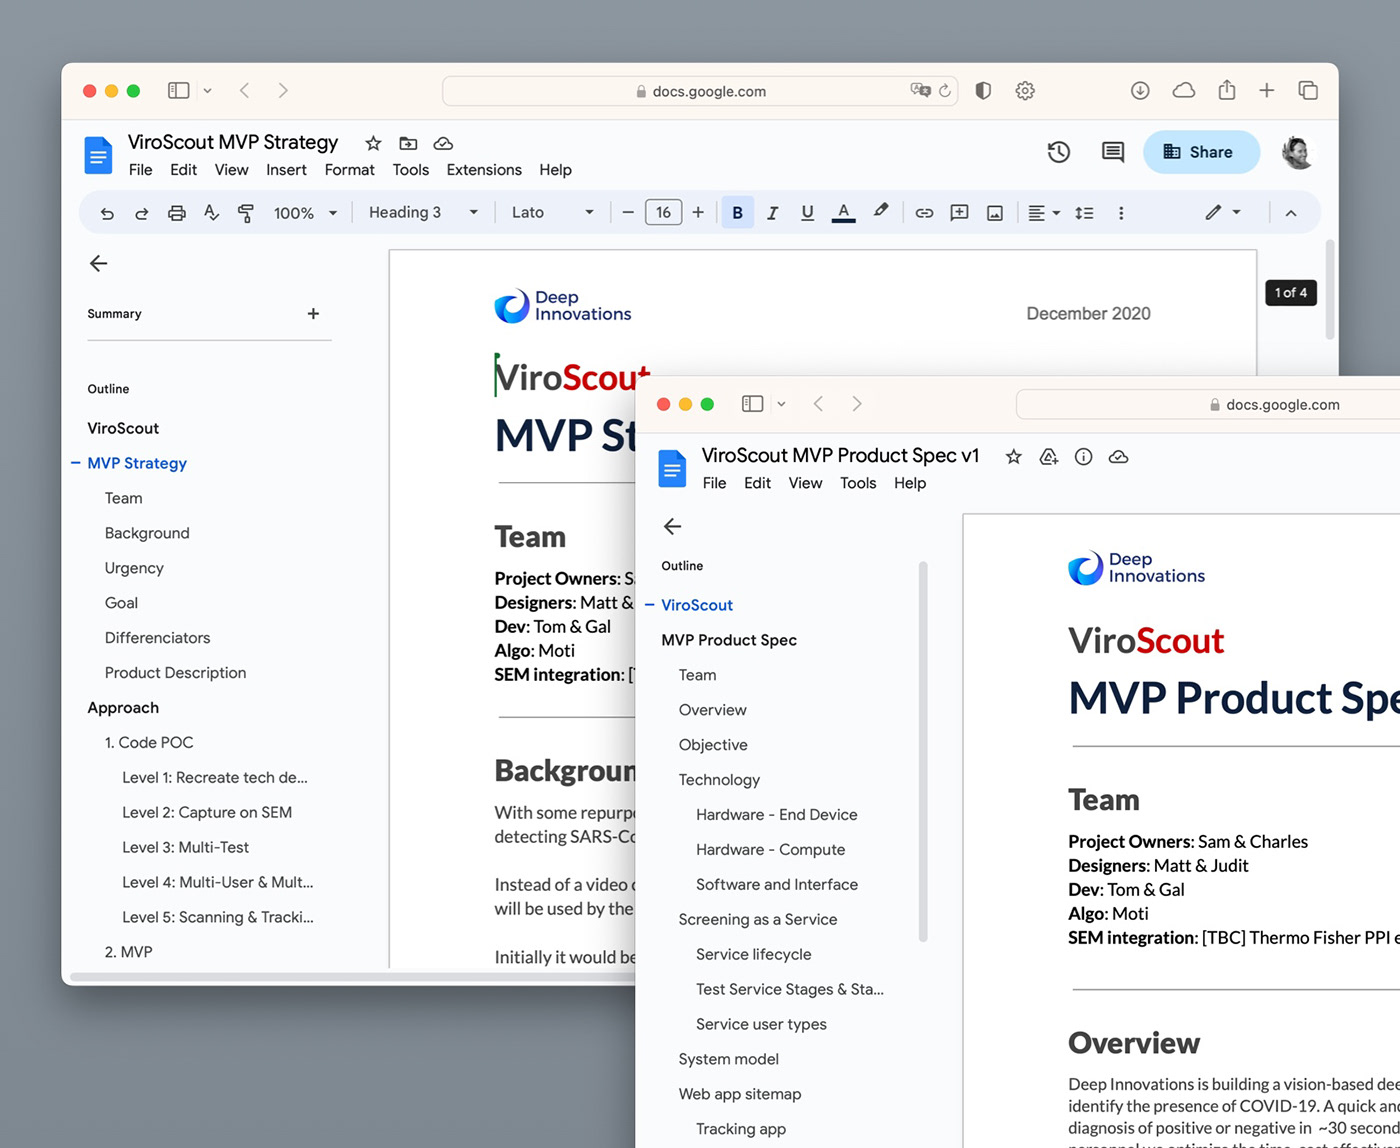 Screenshots of ViroScout's MVP Product Spec and Strategy in Google docs